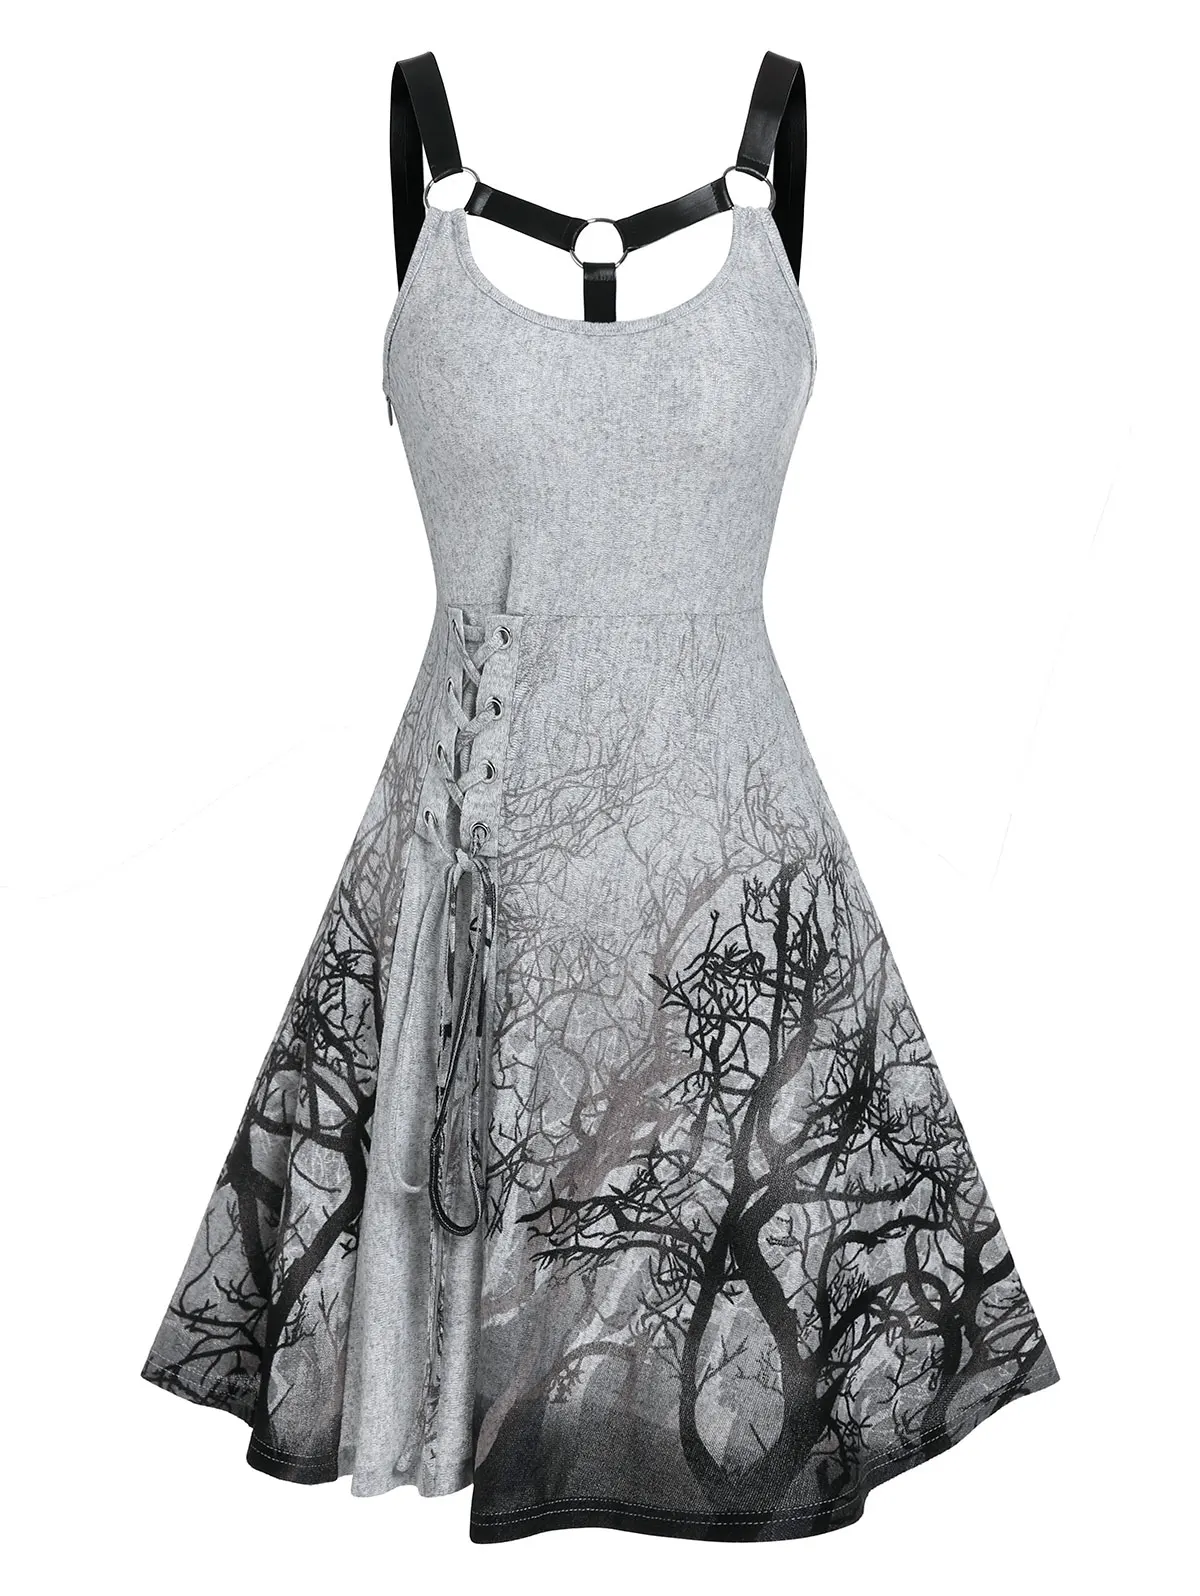 

Gothic Bandage Tree Printed Lace Up Flare Dress Asymmetric A Line Branch Print Club Party Vestidos For Female